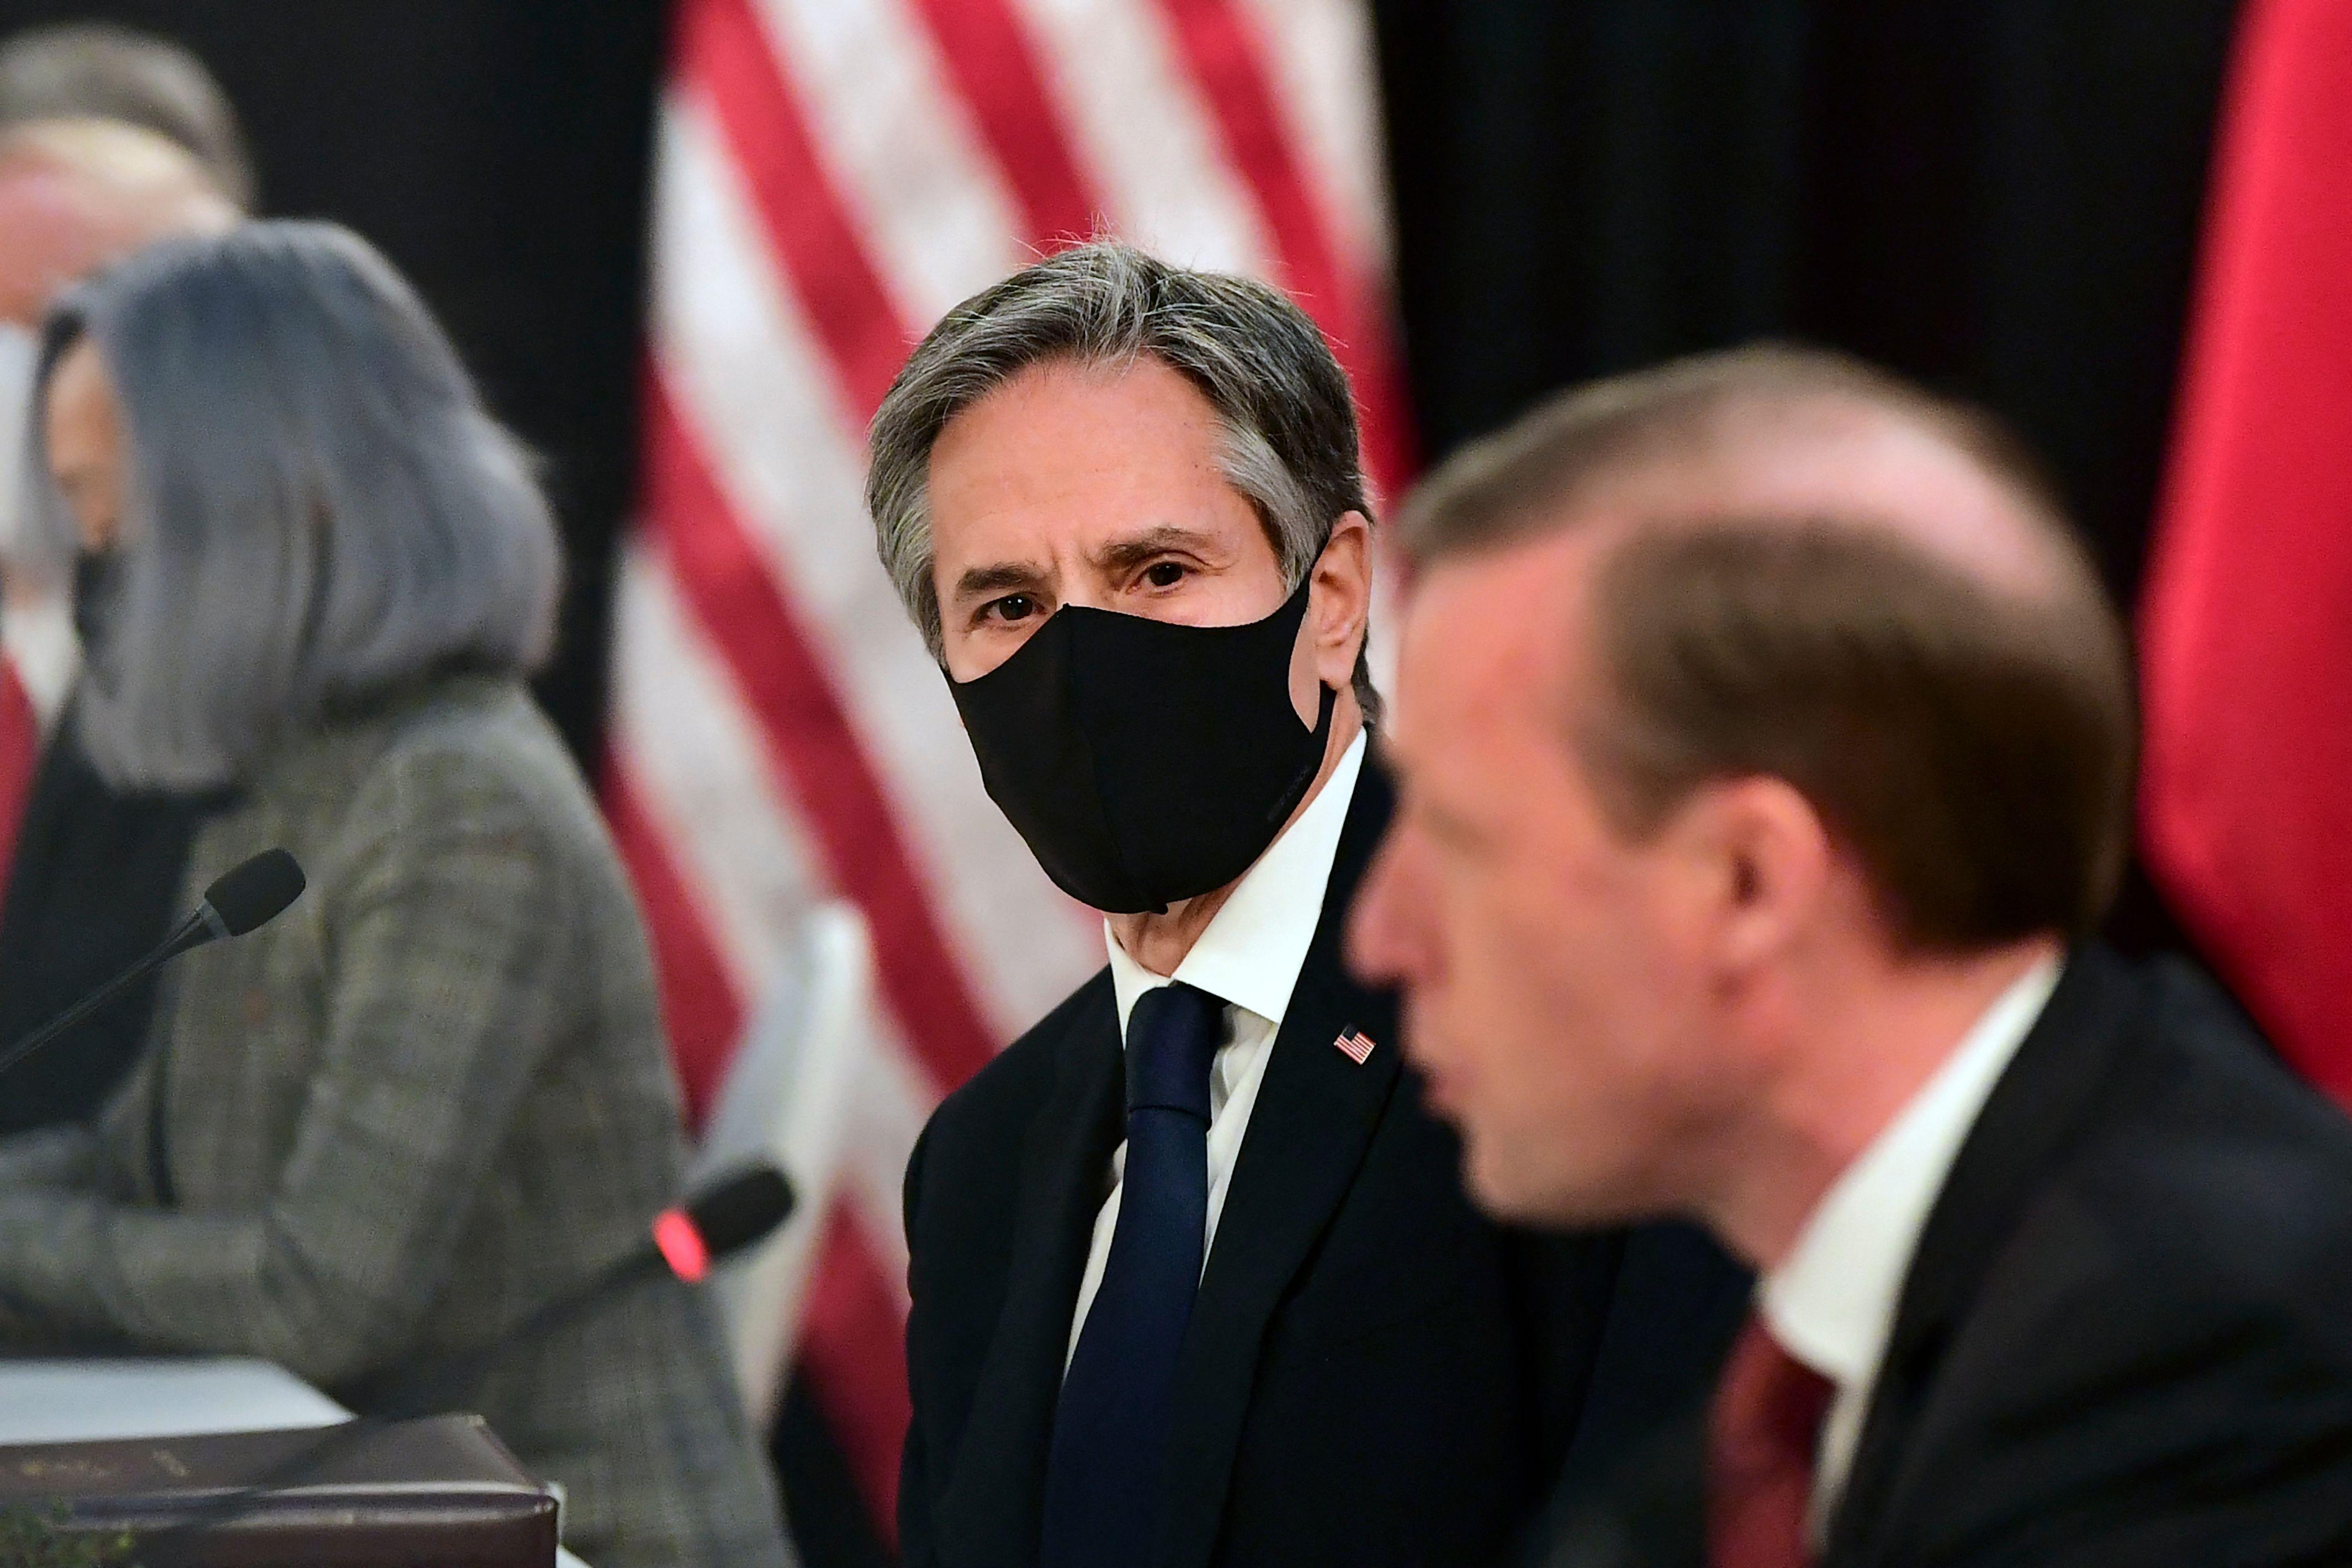 One man in the foreground speaking. Another in the background, in a mask, looking on.